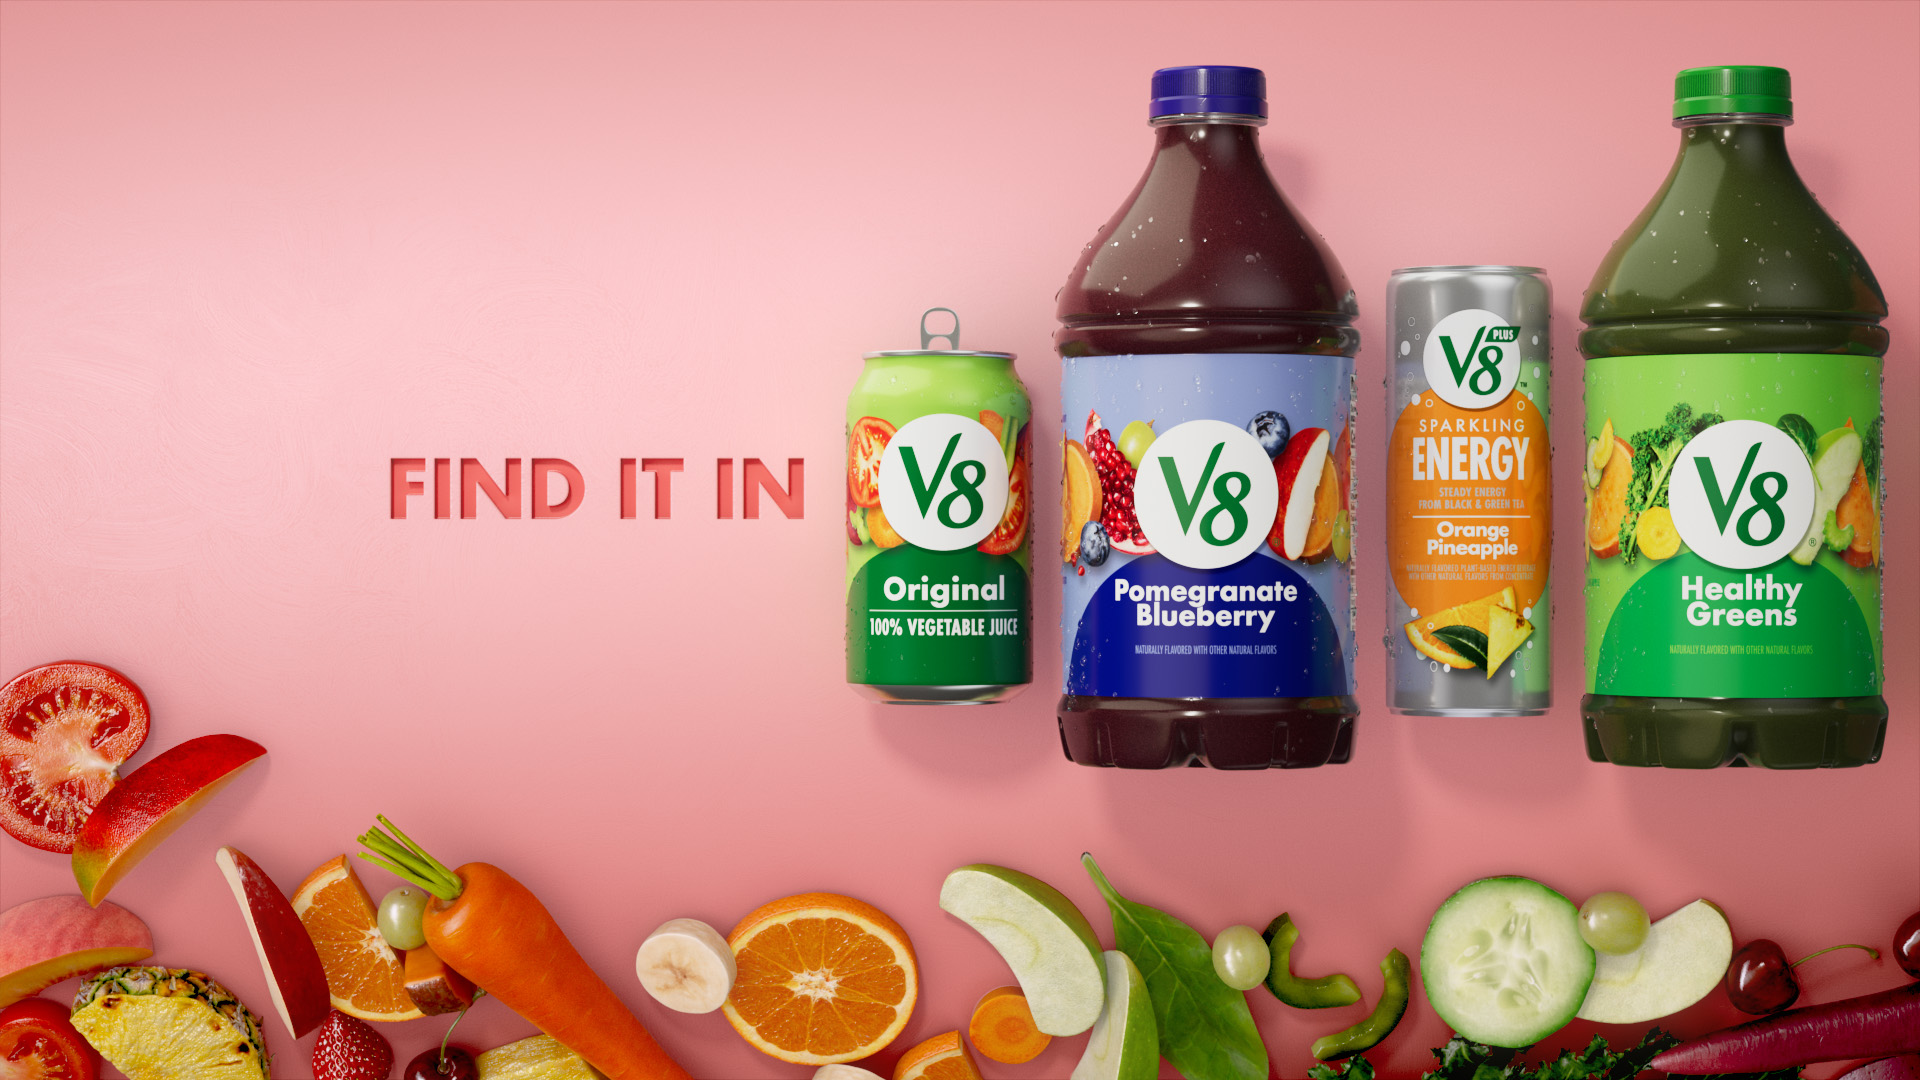 Various V8 products against a pink background with fruit and vegetables